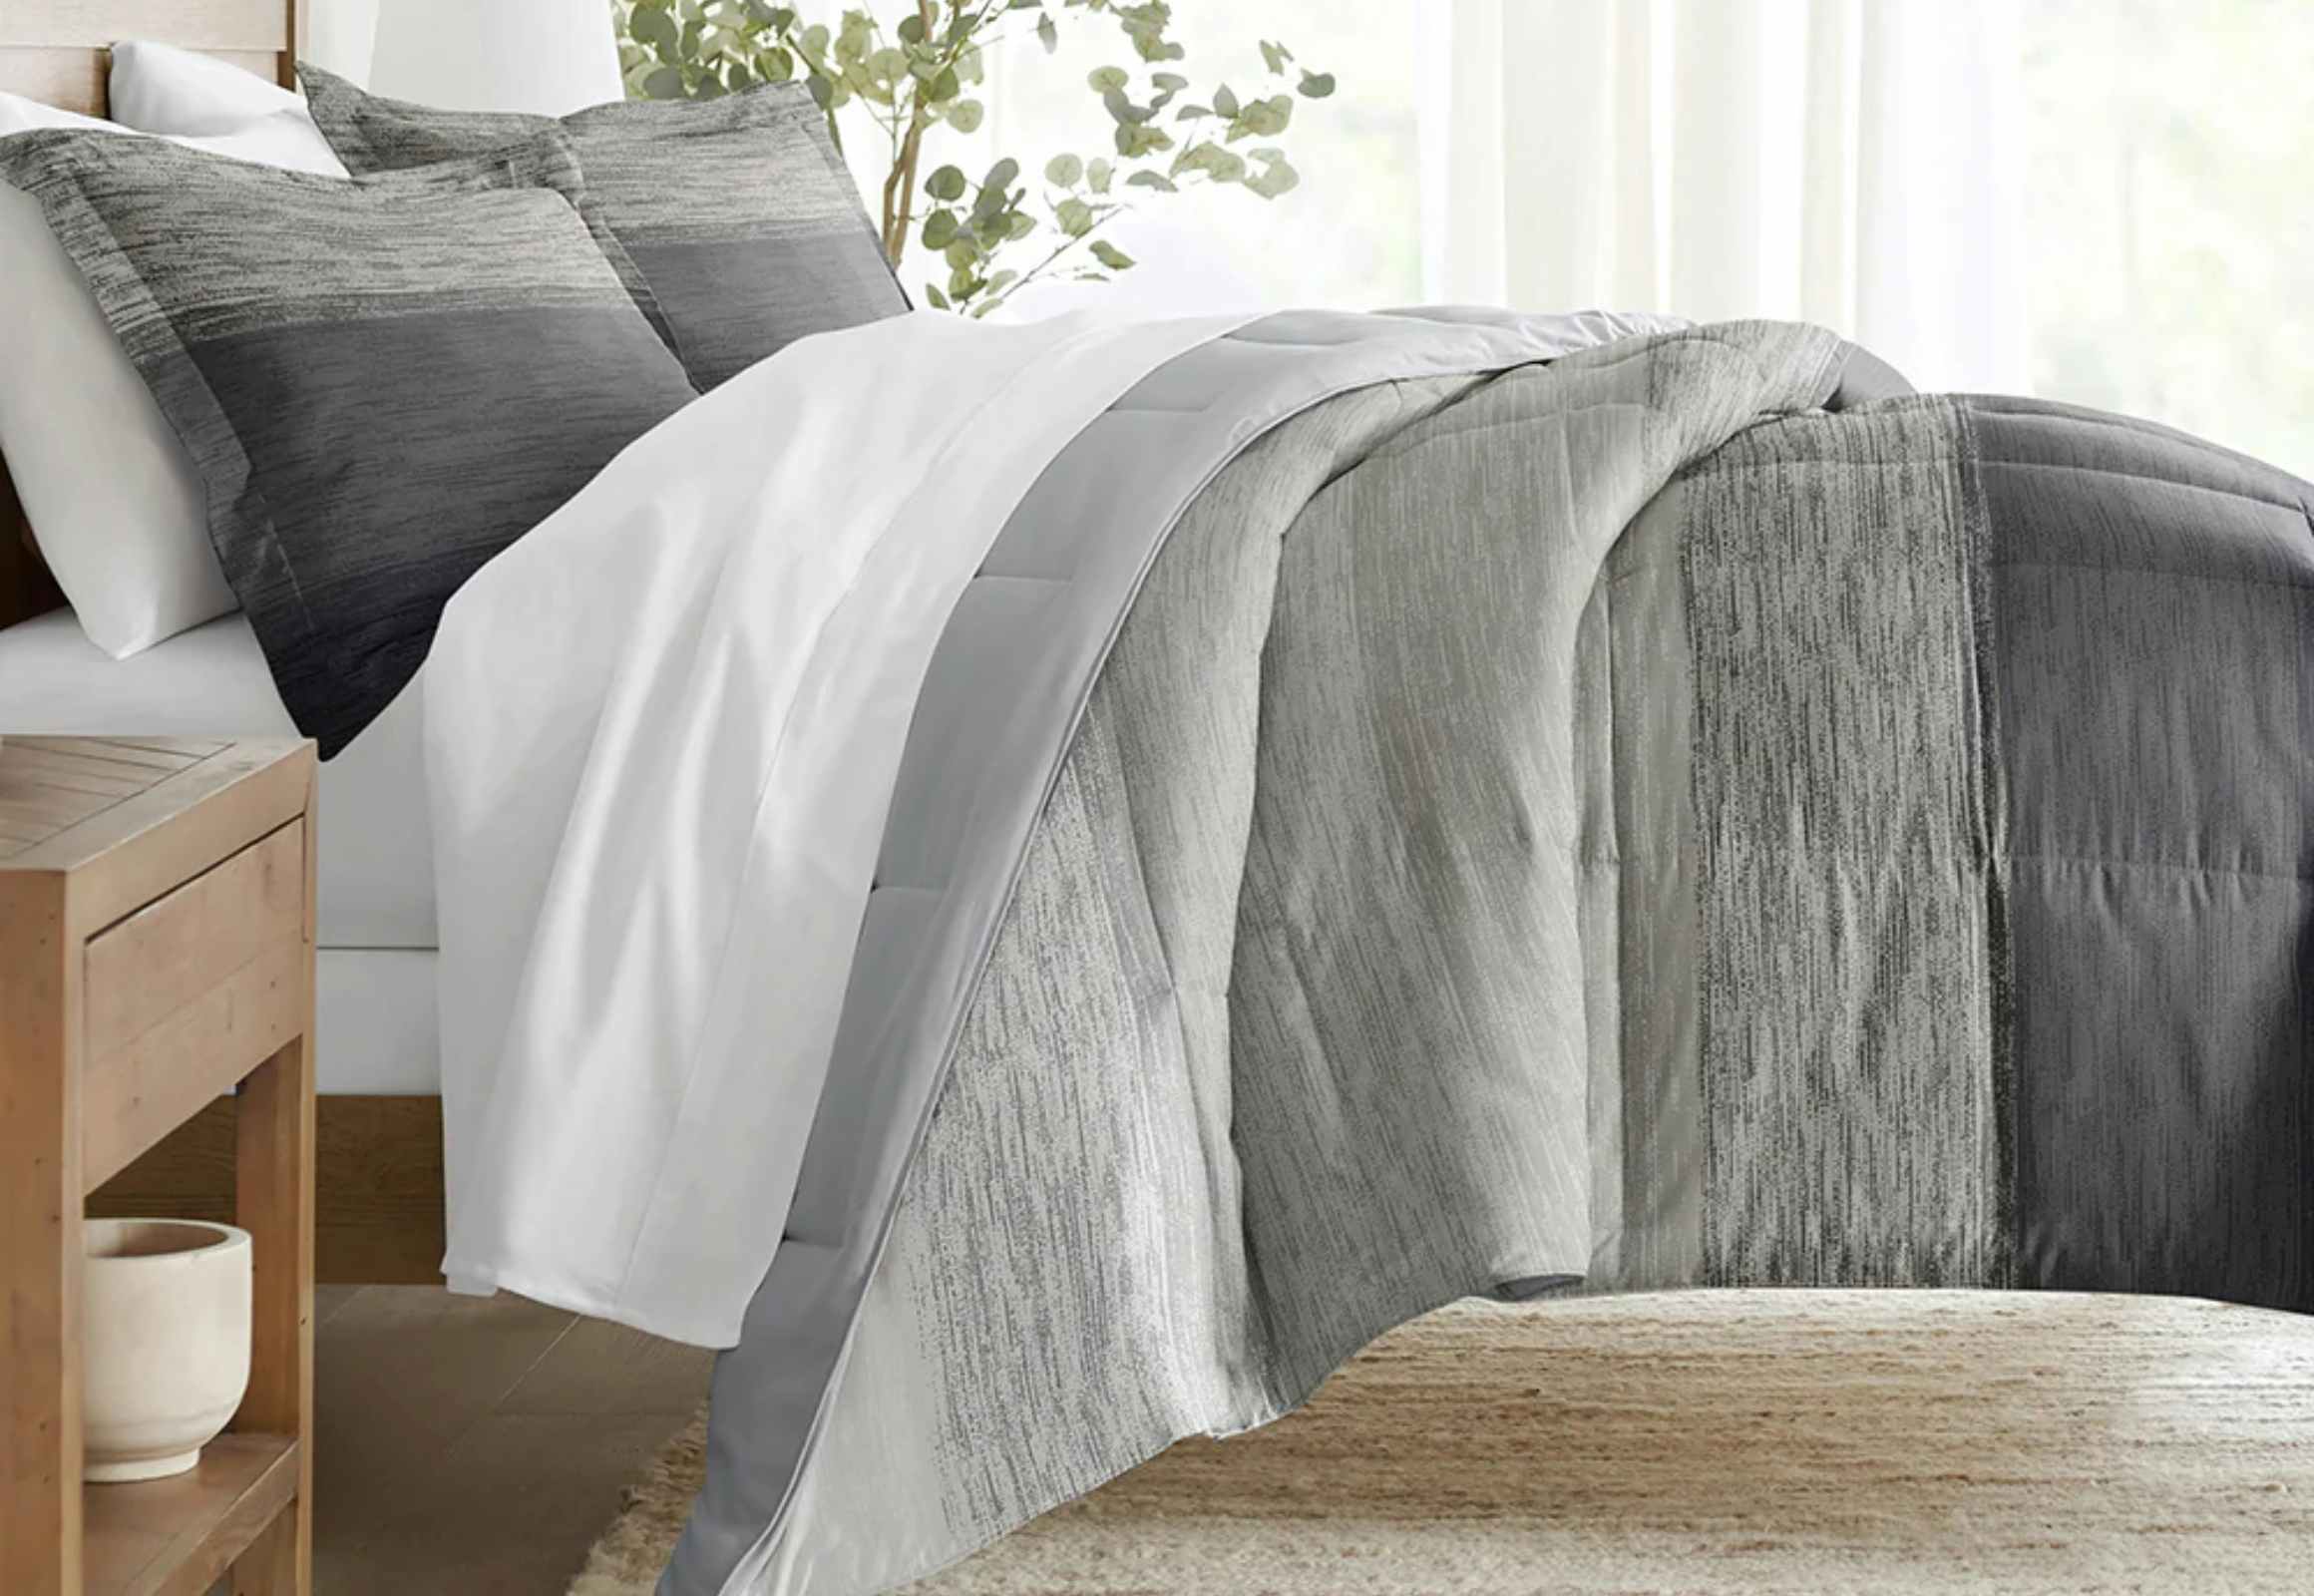 Never-Before-Seen Prices at Linens & Hutch — Get $32 Comforter Sets